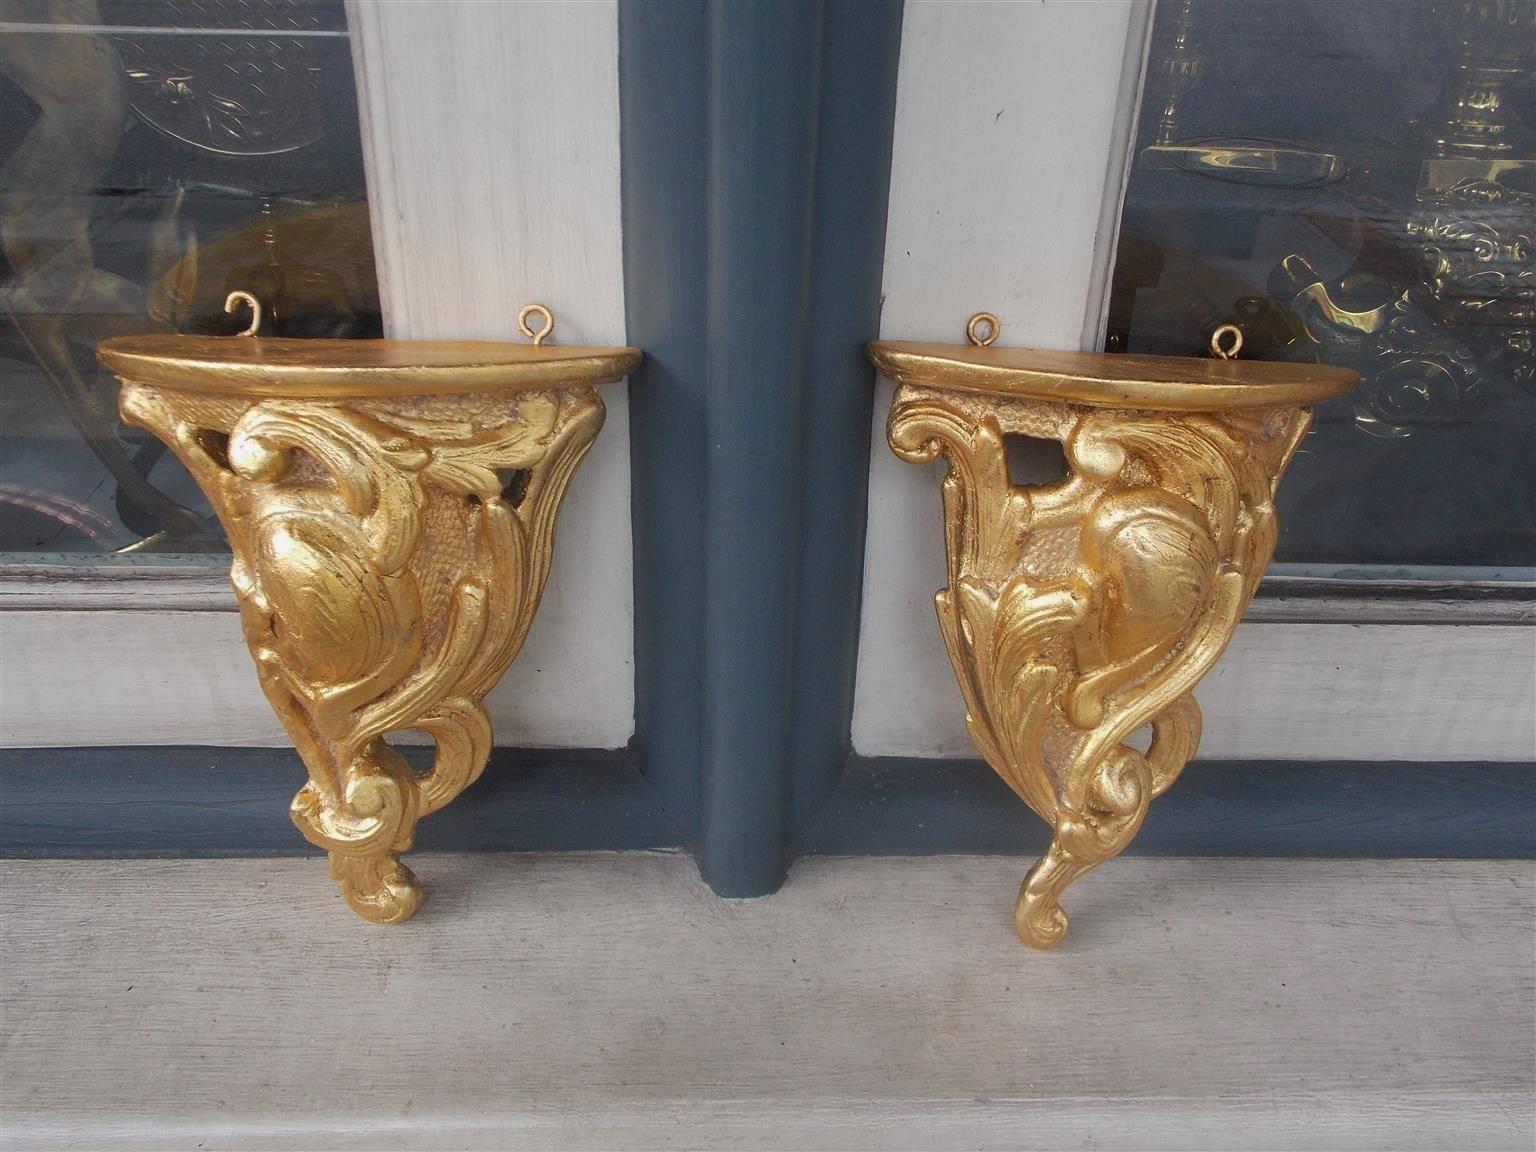 Neoclassical Pair of Italian Gilt Carved Wood Demilune Acanthus Wall Brackets, Circa 1800 For Sale